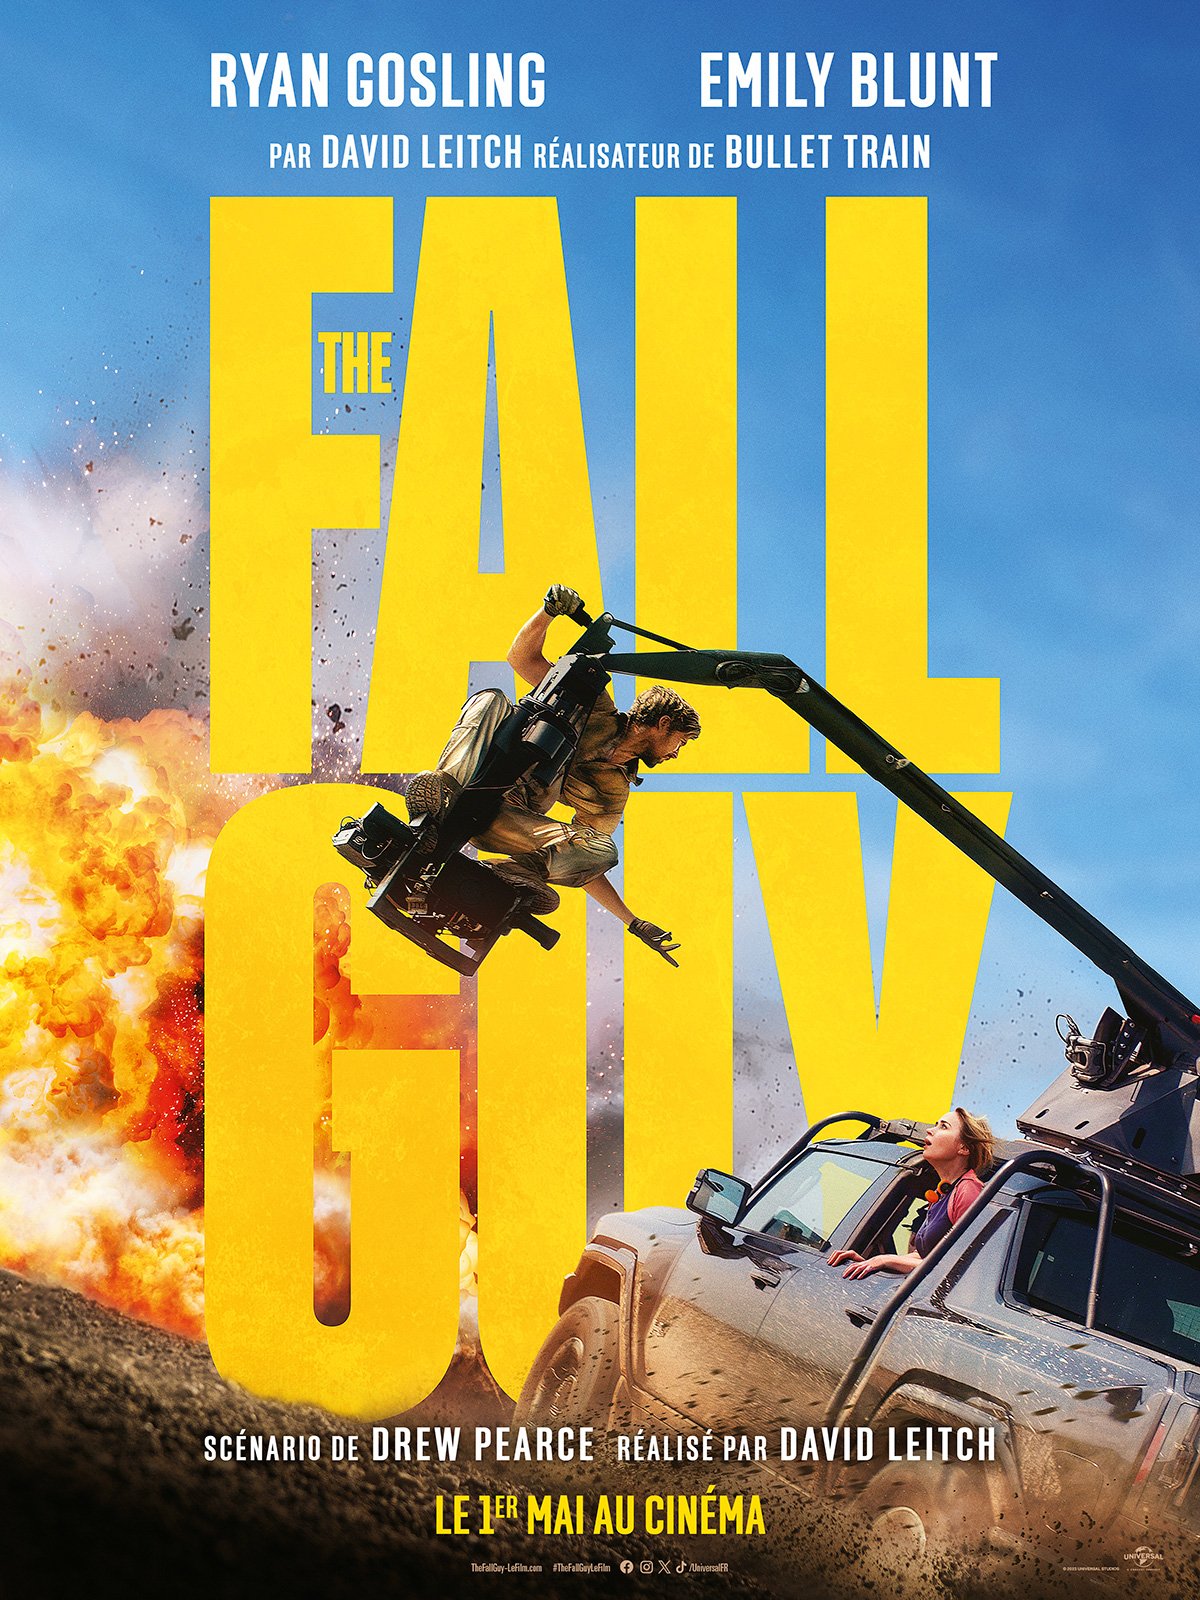 THE FALL GUY (FILM ANNONCE 4DX)